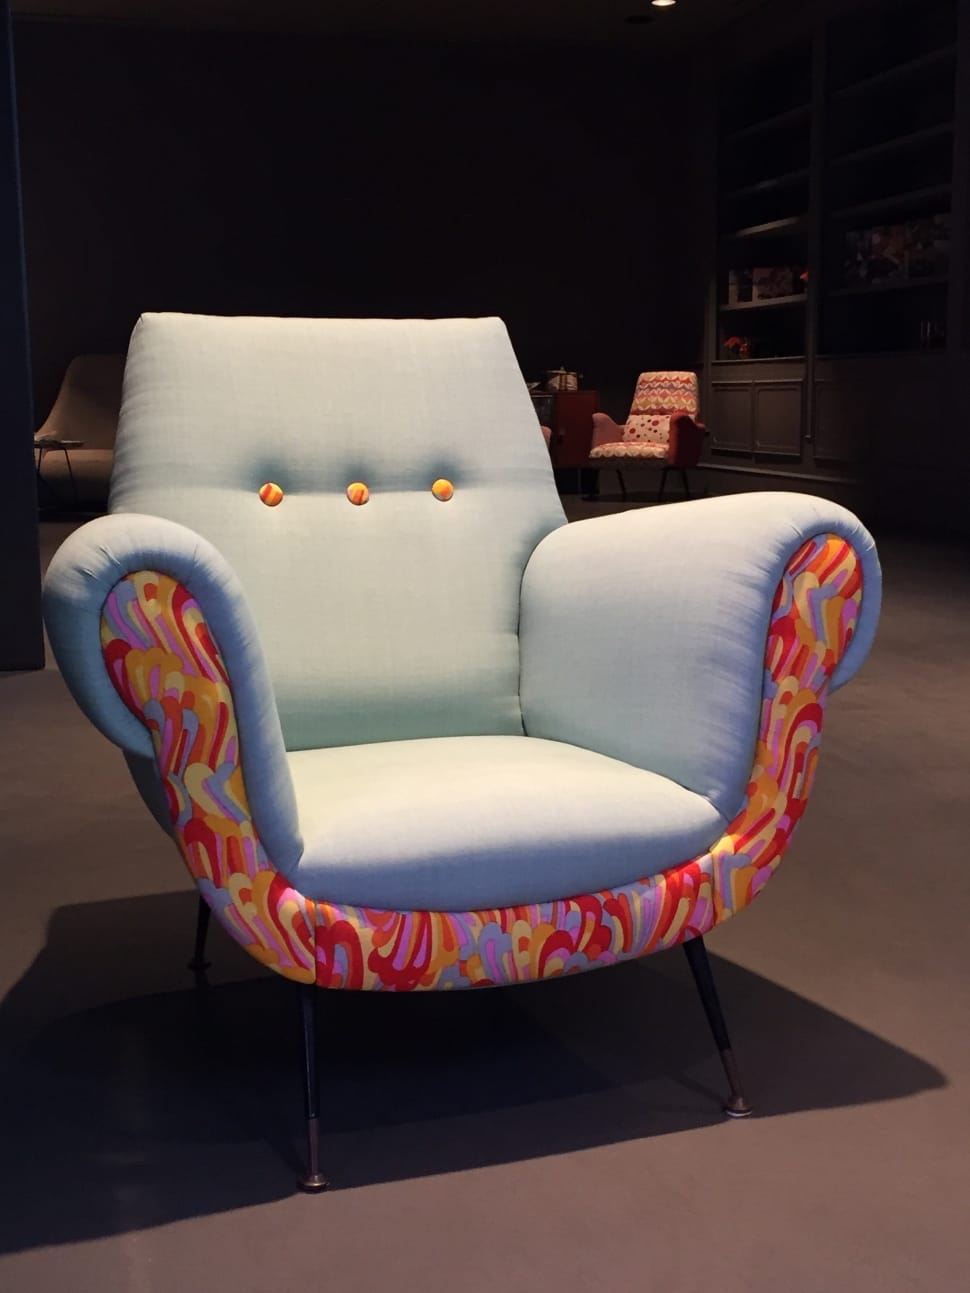 blue and orange sofa chair preview